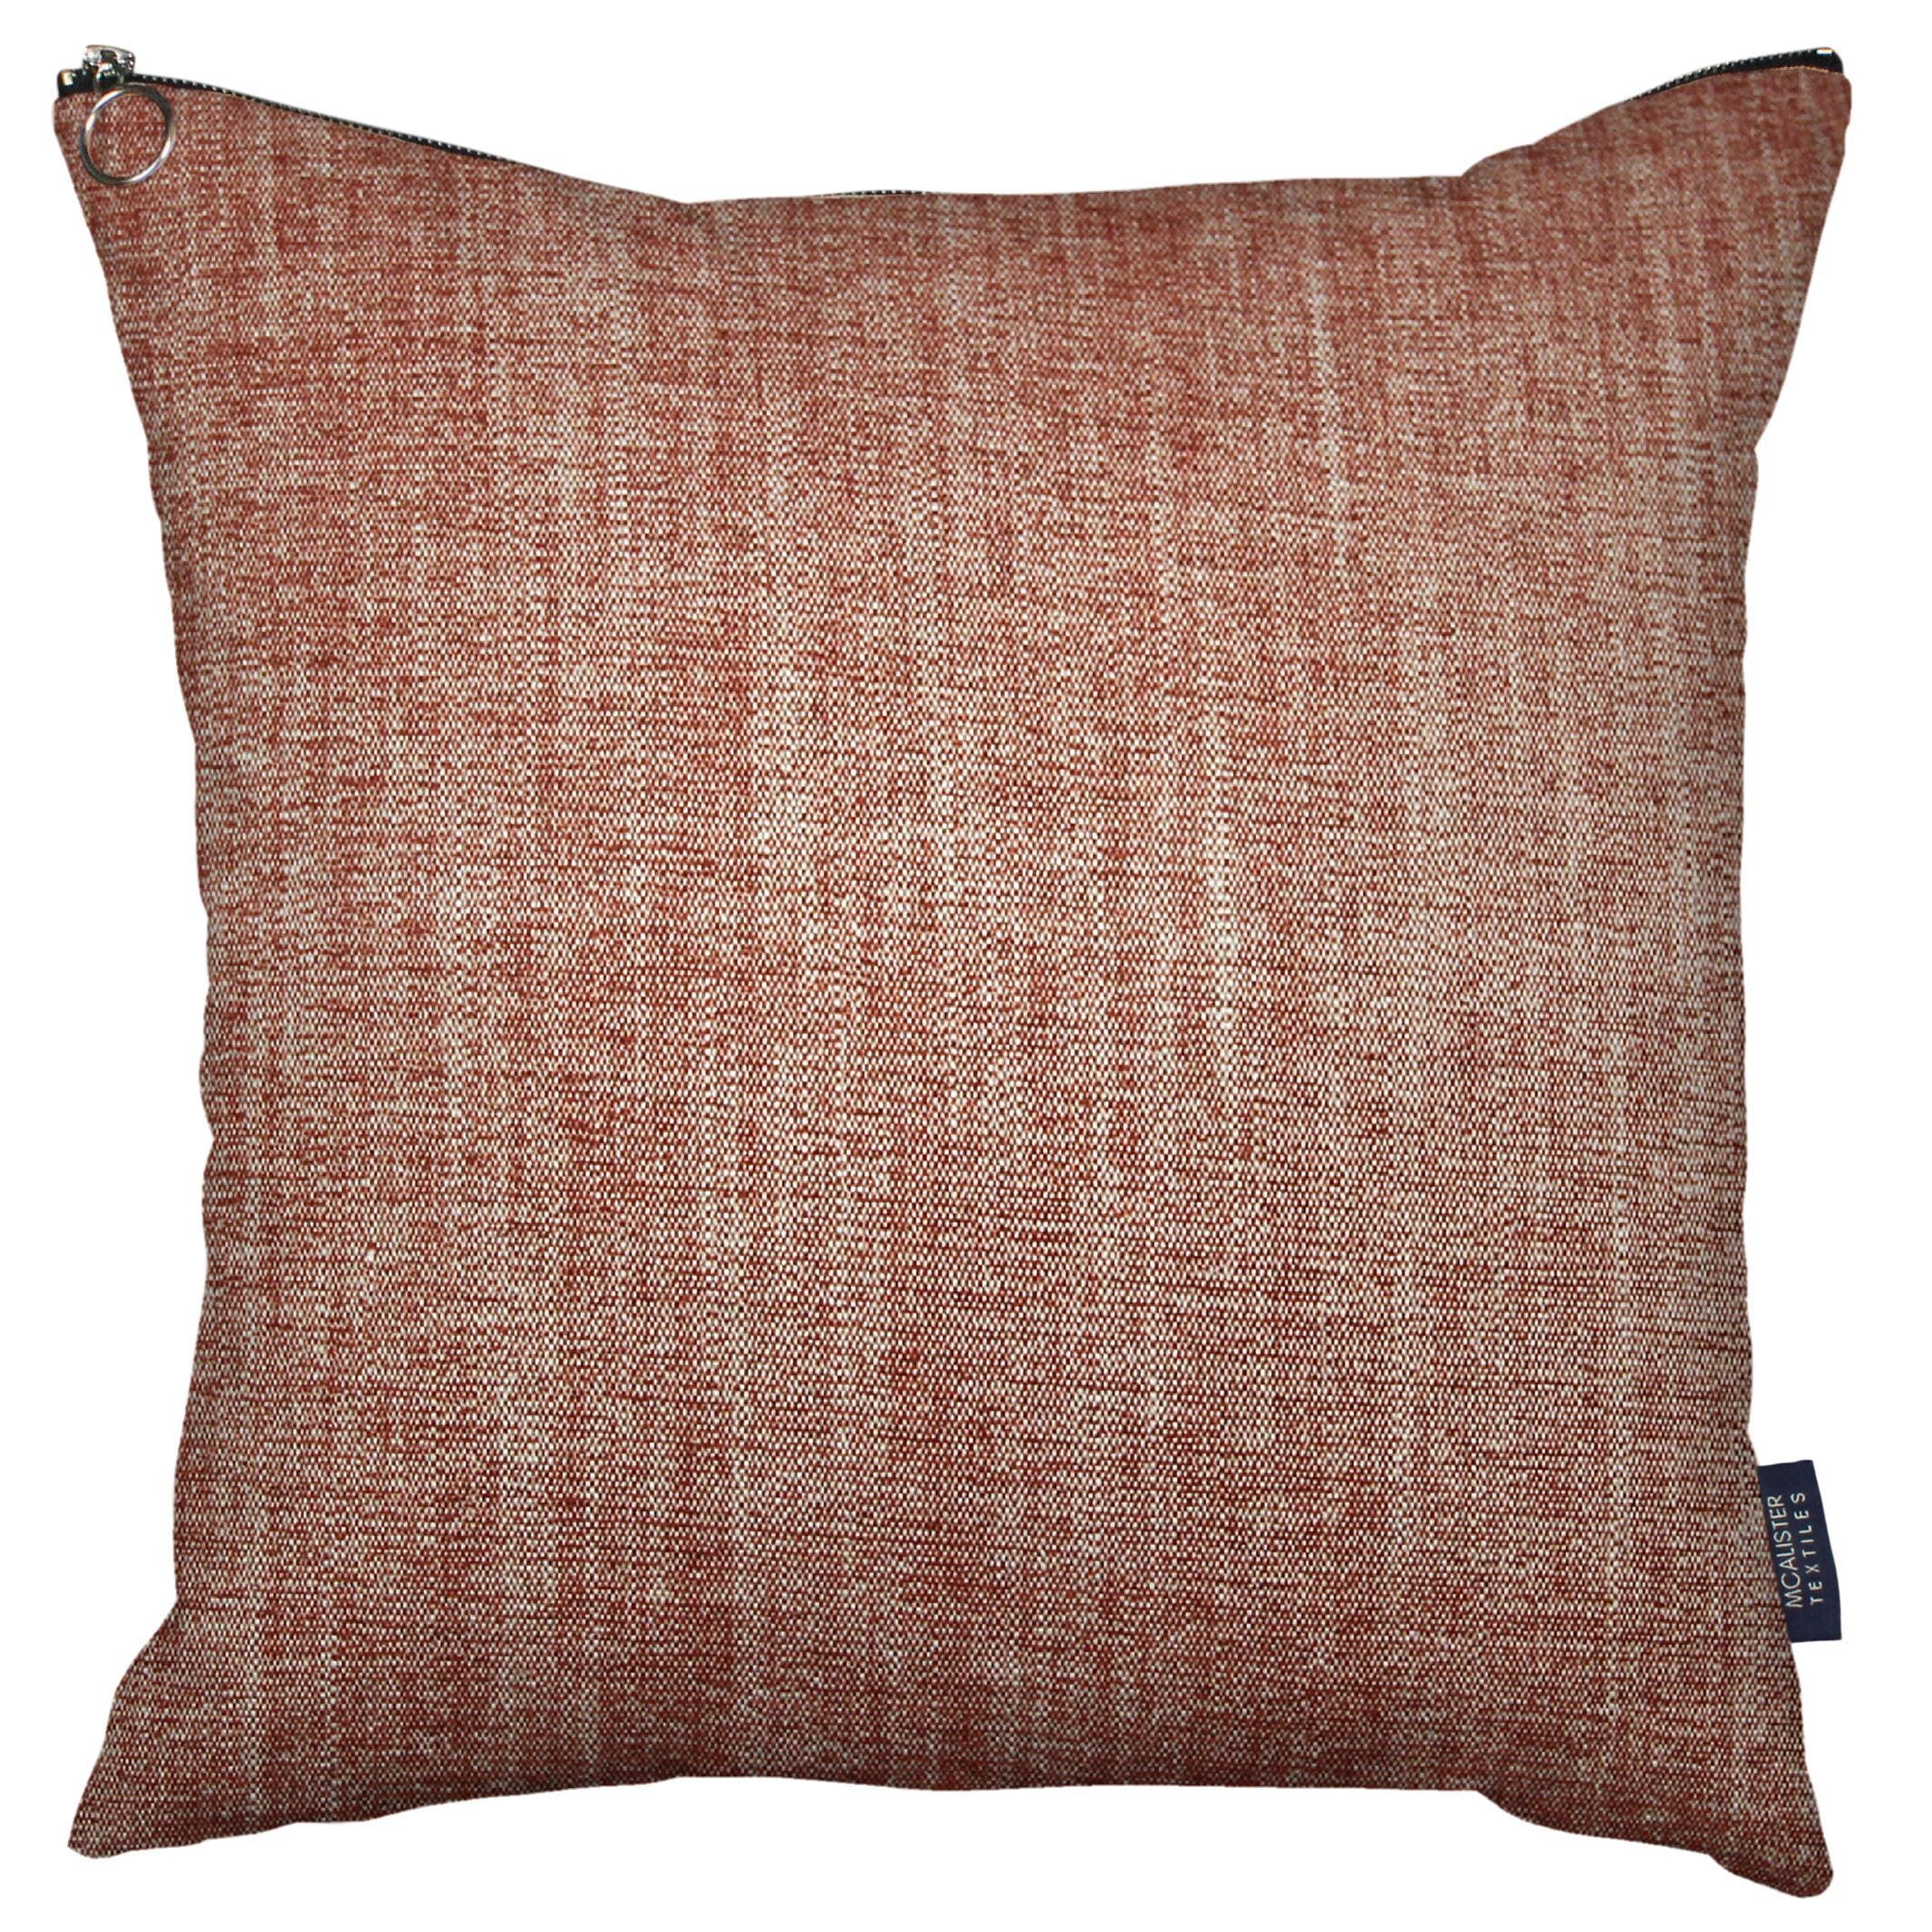 McAlister Textiles Rhumba Zipper Edge Burnt Orange Linen Cushion Cushions and Covers Cover Only 43cm x 43cm 